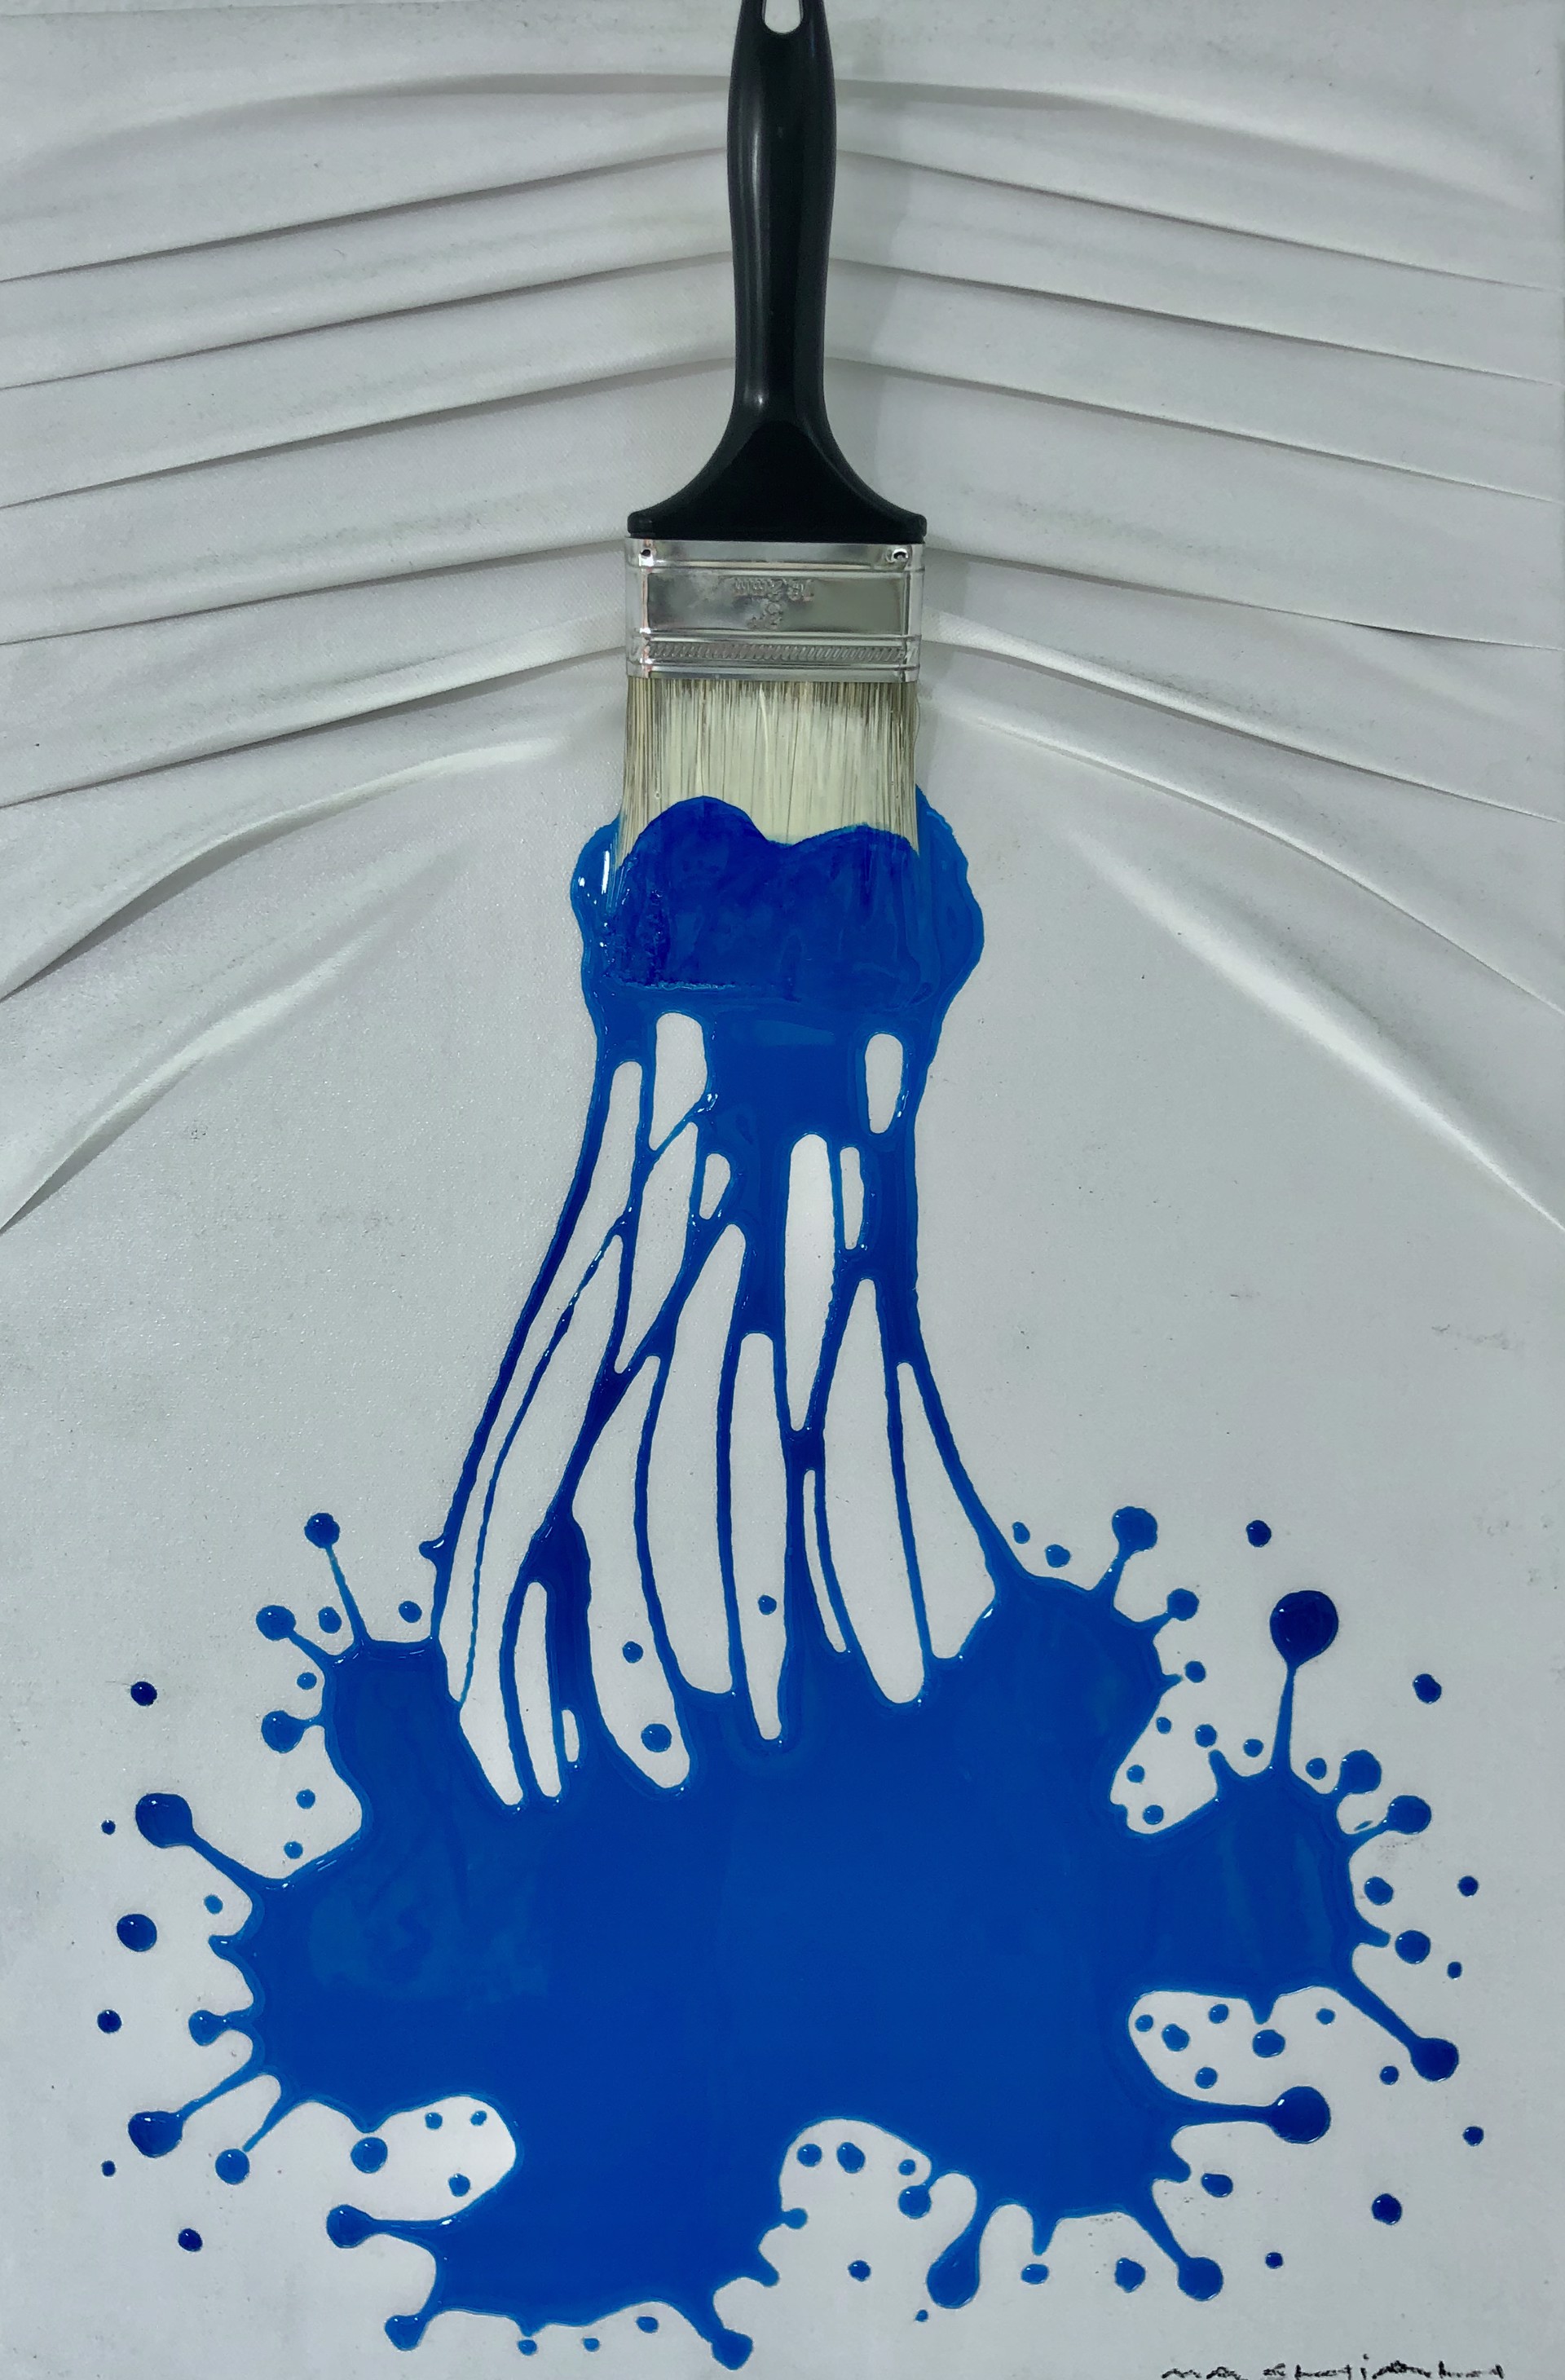  "Let's Paint" small, Blue splash on White by Brushes and Rollers "Let's Paint" by Efi Mashiah